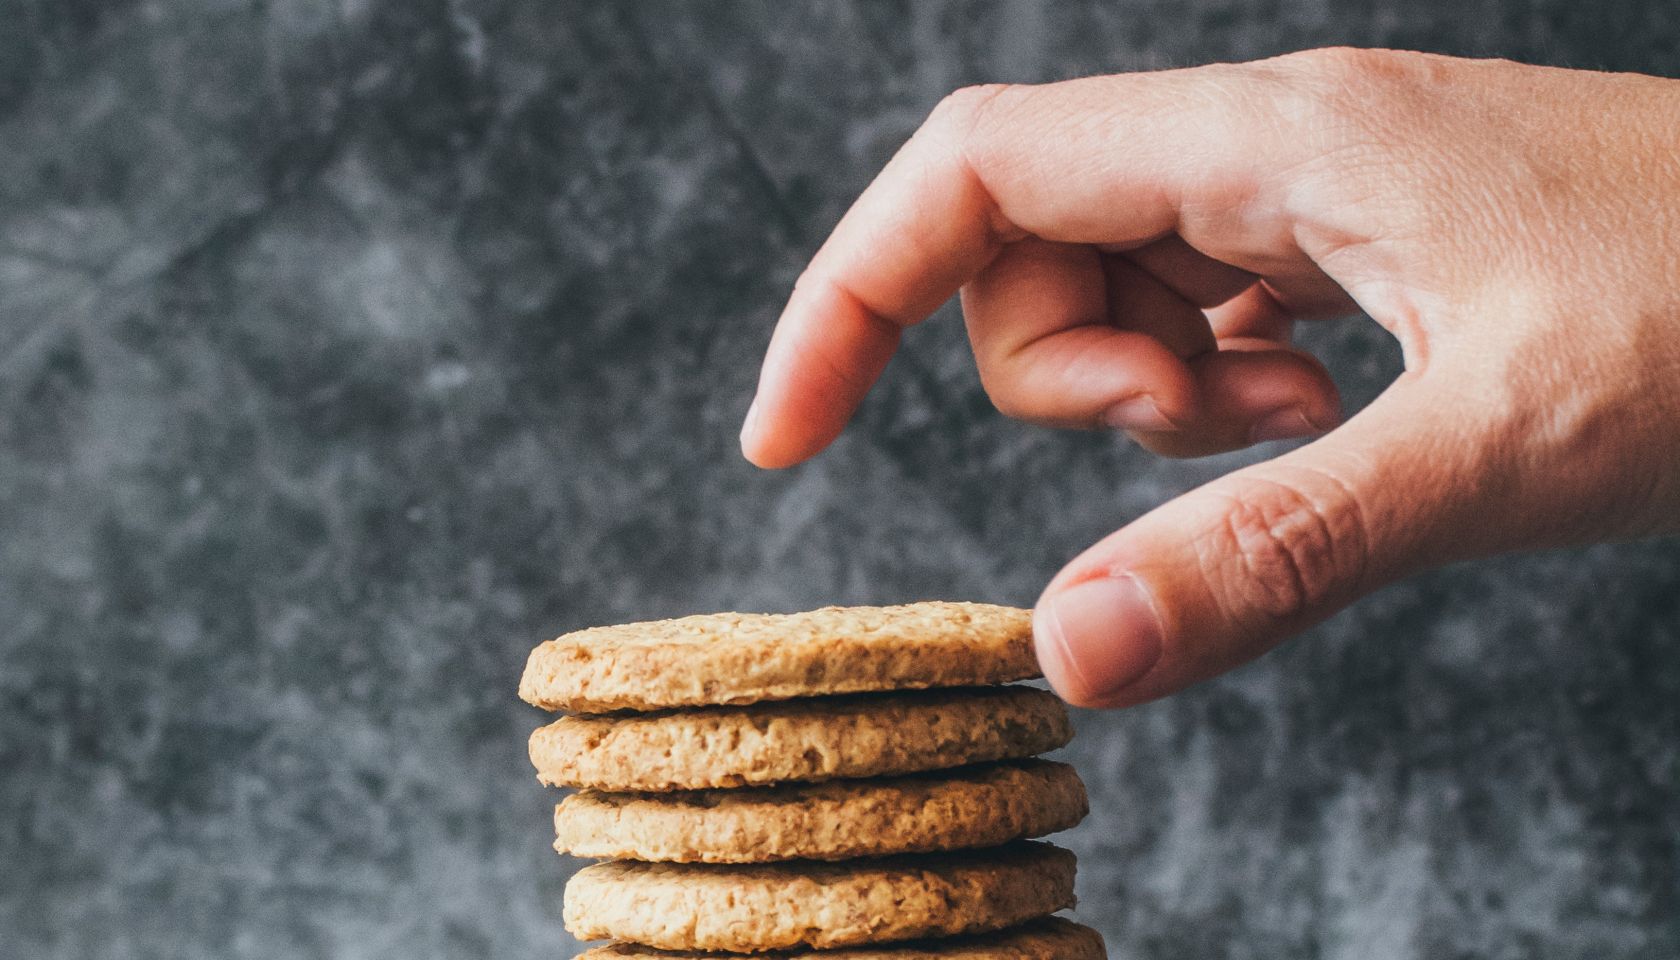 A man's hand reaches for a stack of cookies